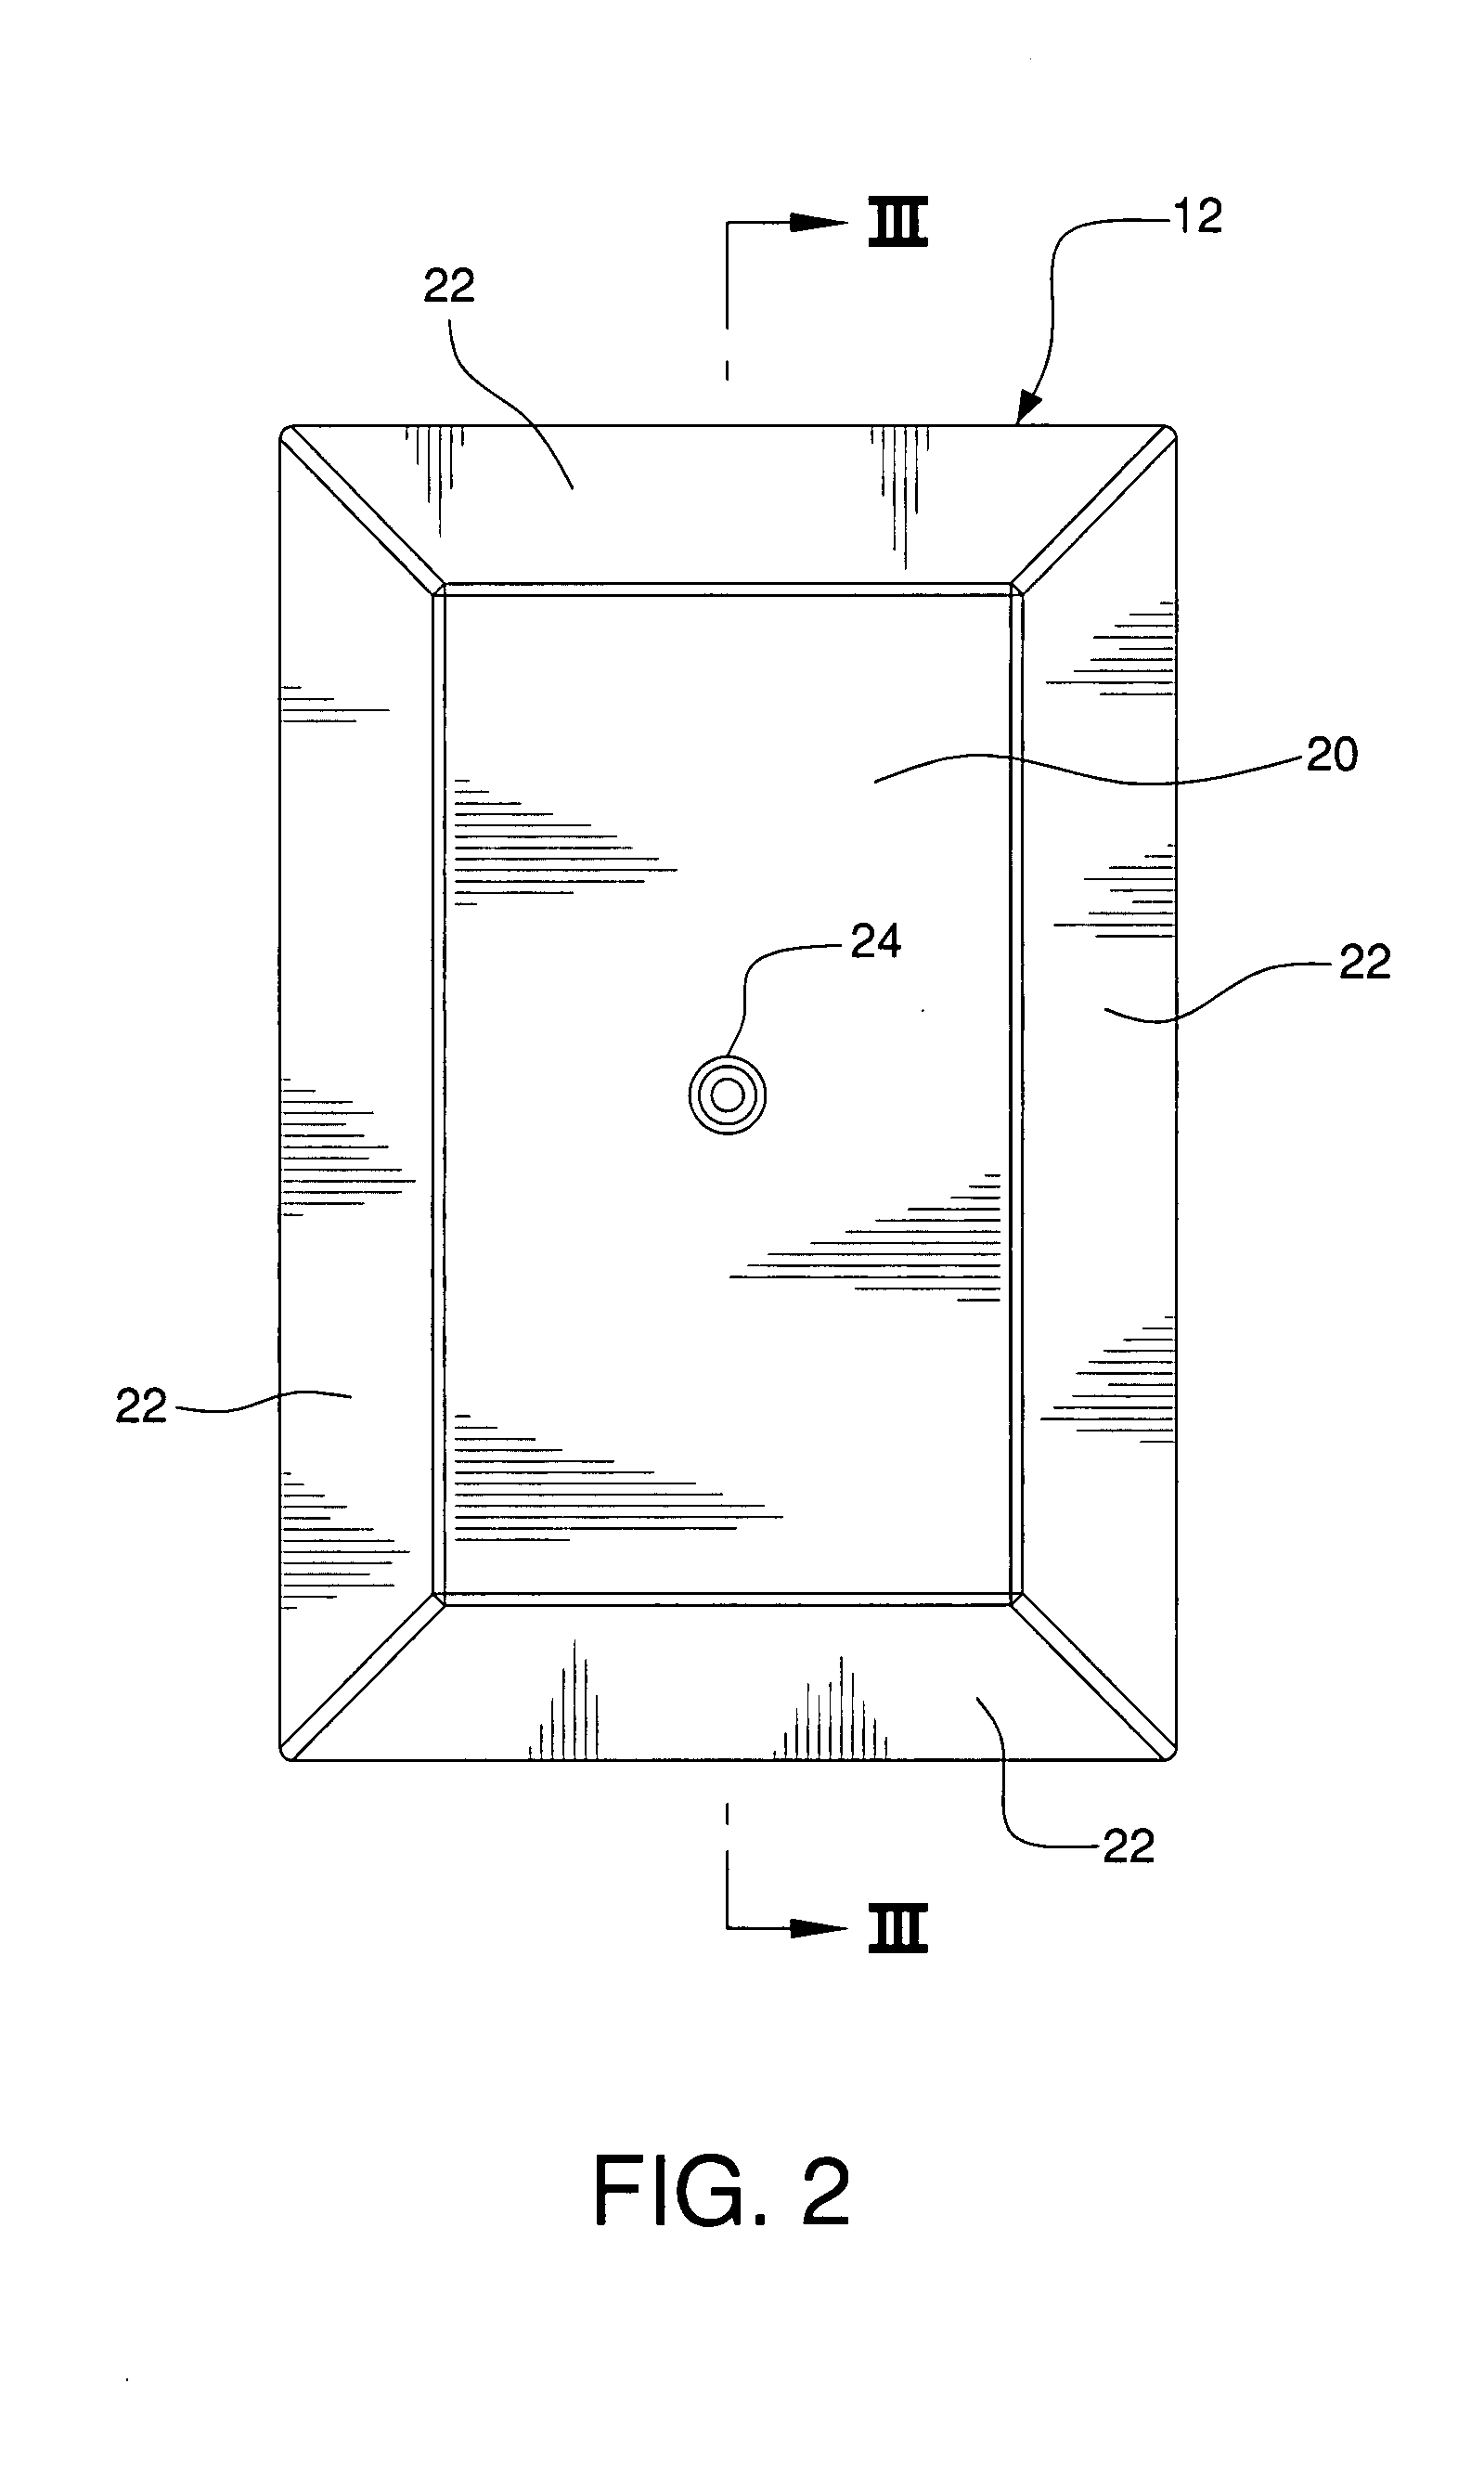 Tamper resistant electrical outlet cover assembly